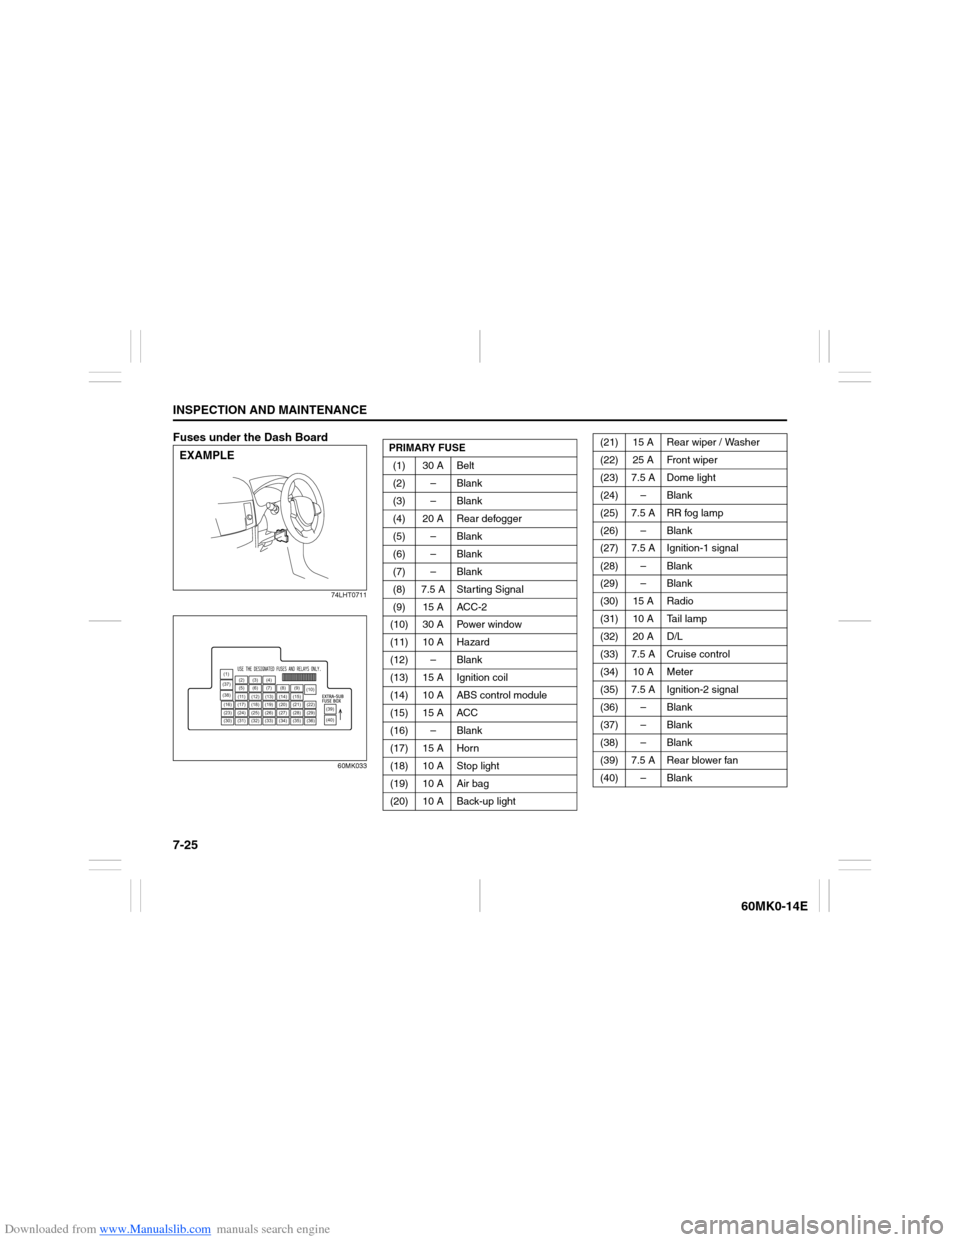 SUZUKI ERTIGA 2013 1.G Owners Manual Downloaded from www.Manualslib.com manuals search engine 7-25INSPECTION AND MAINTENANCE
60MK0-14E
Fuses under the Dash Board
74LHT0711
60MK033
EXAMPLE
(1)
(12)(10)
(13)
(36) (2) (3)
(4)
(5)(6)
(7) (8)